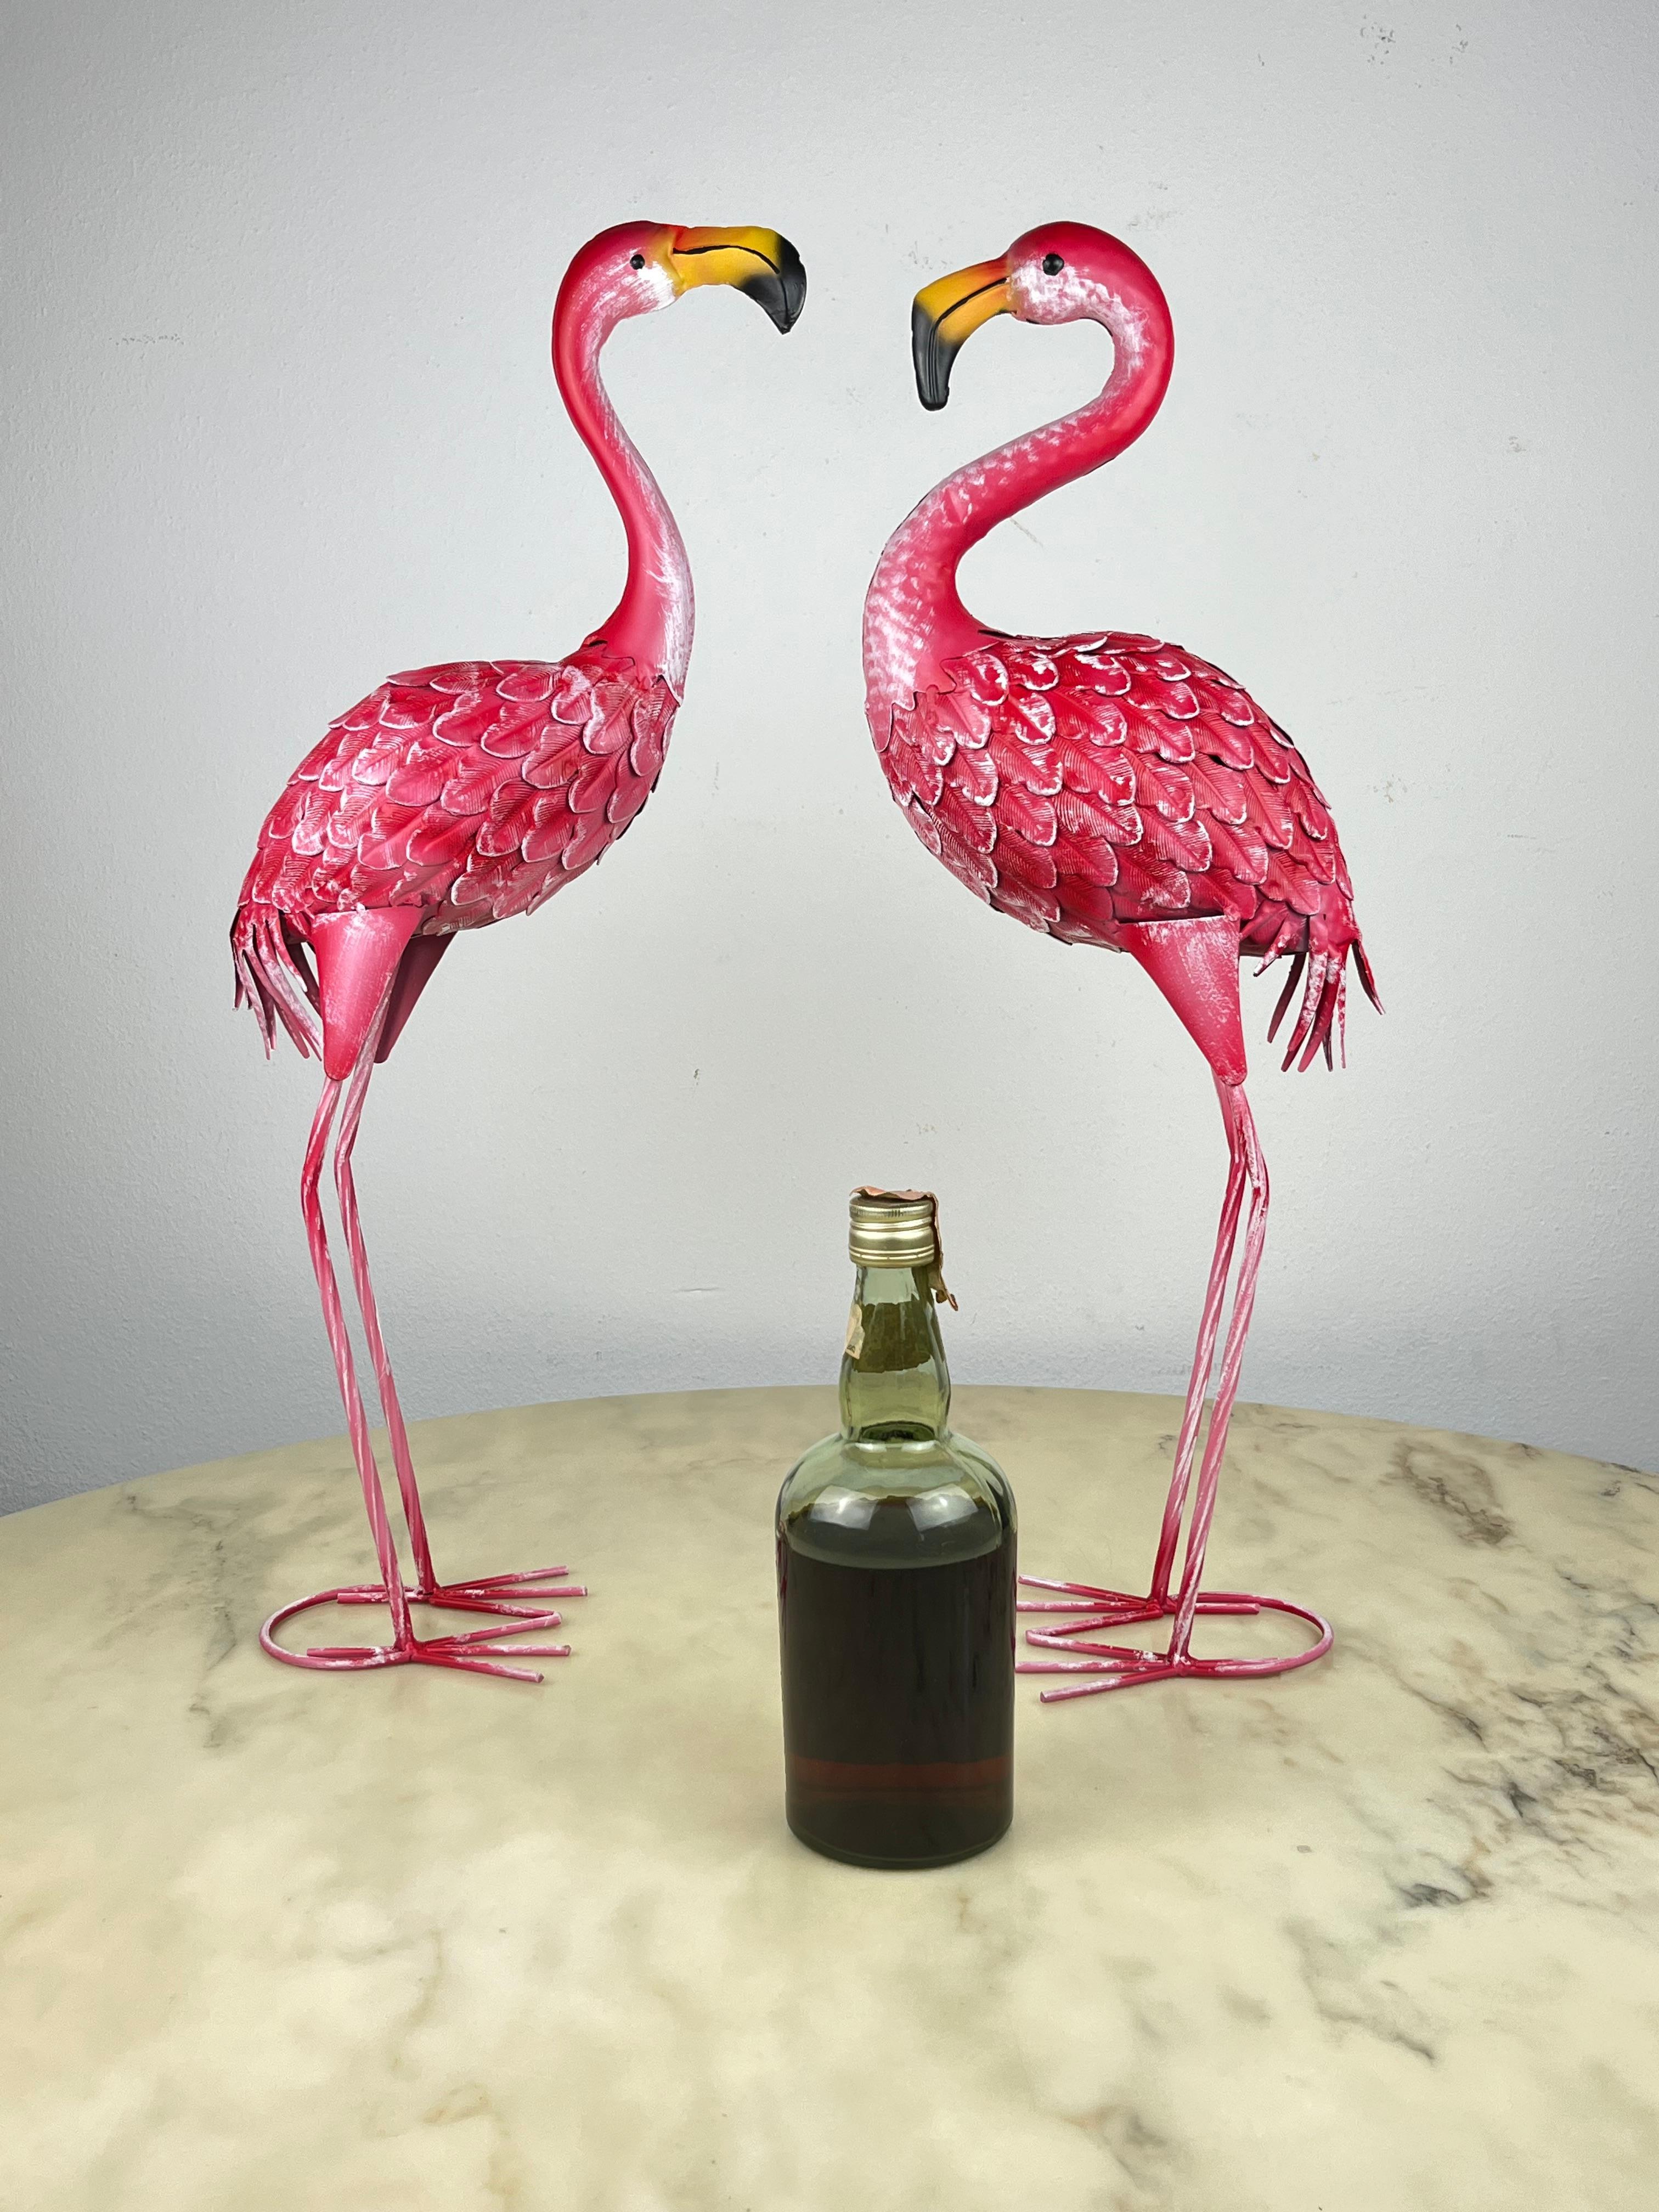 Pair of large metal flamingos, Italy, 1980s
Good condition, small signs of aging.